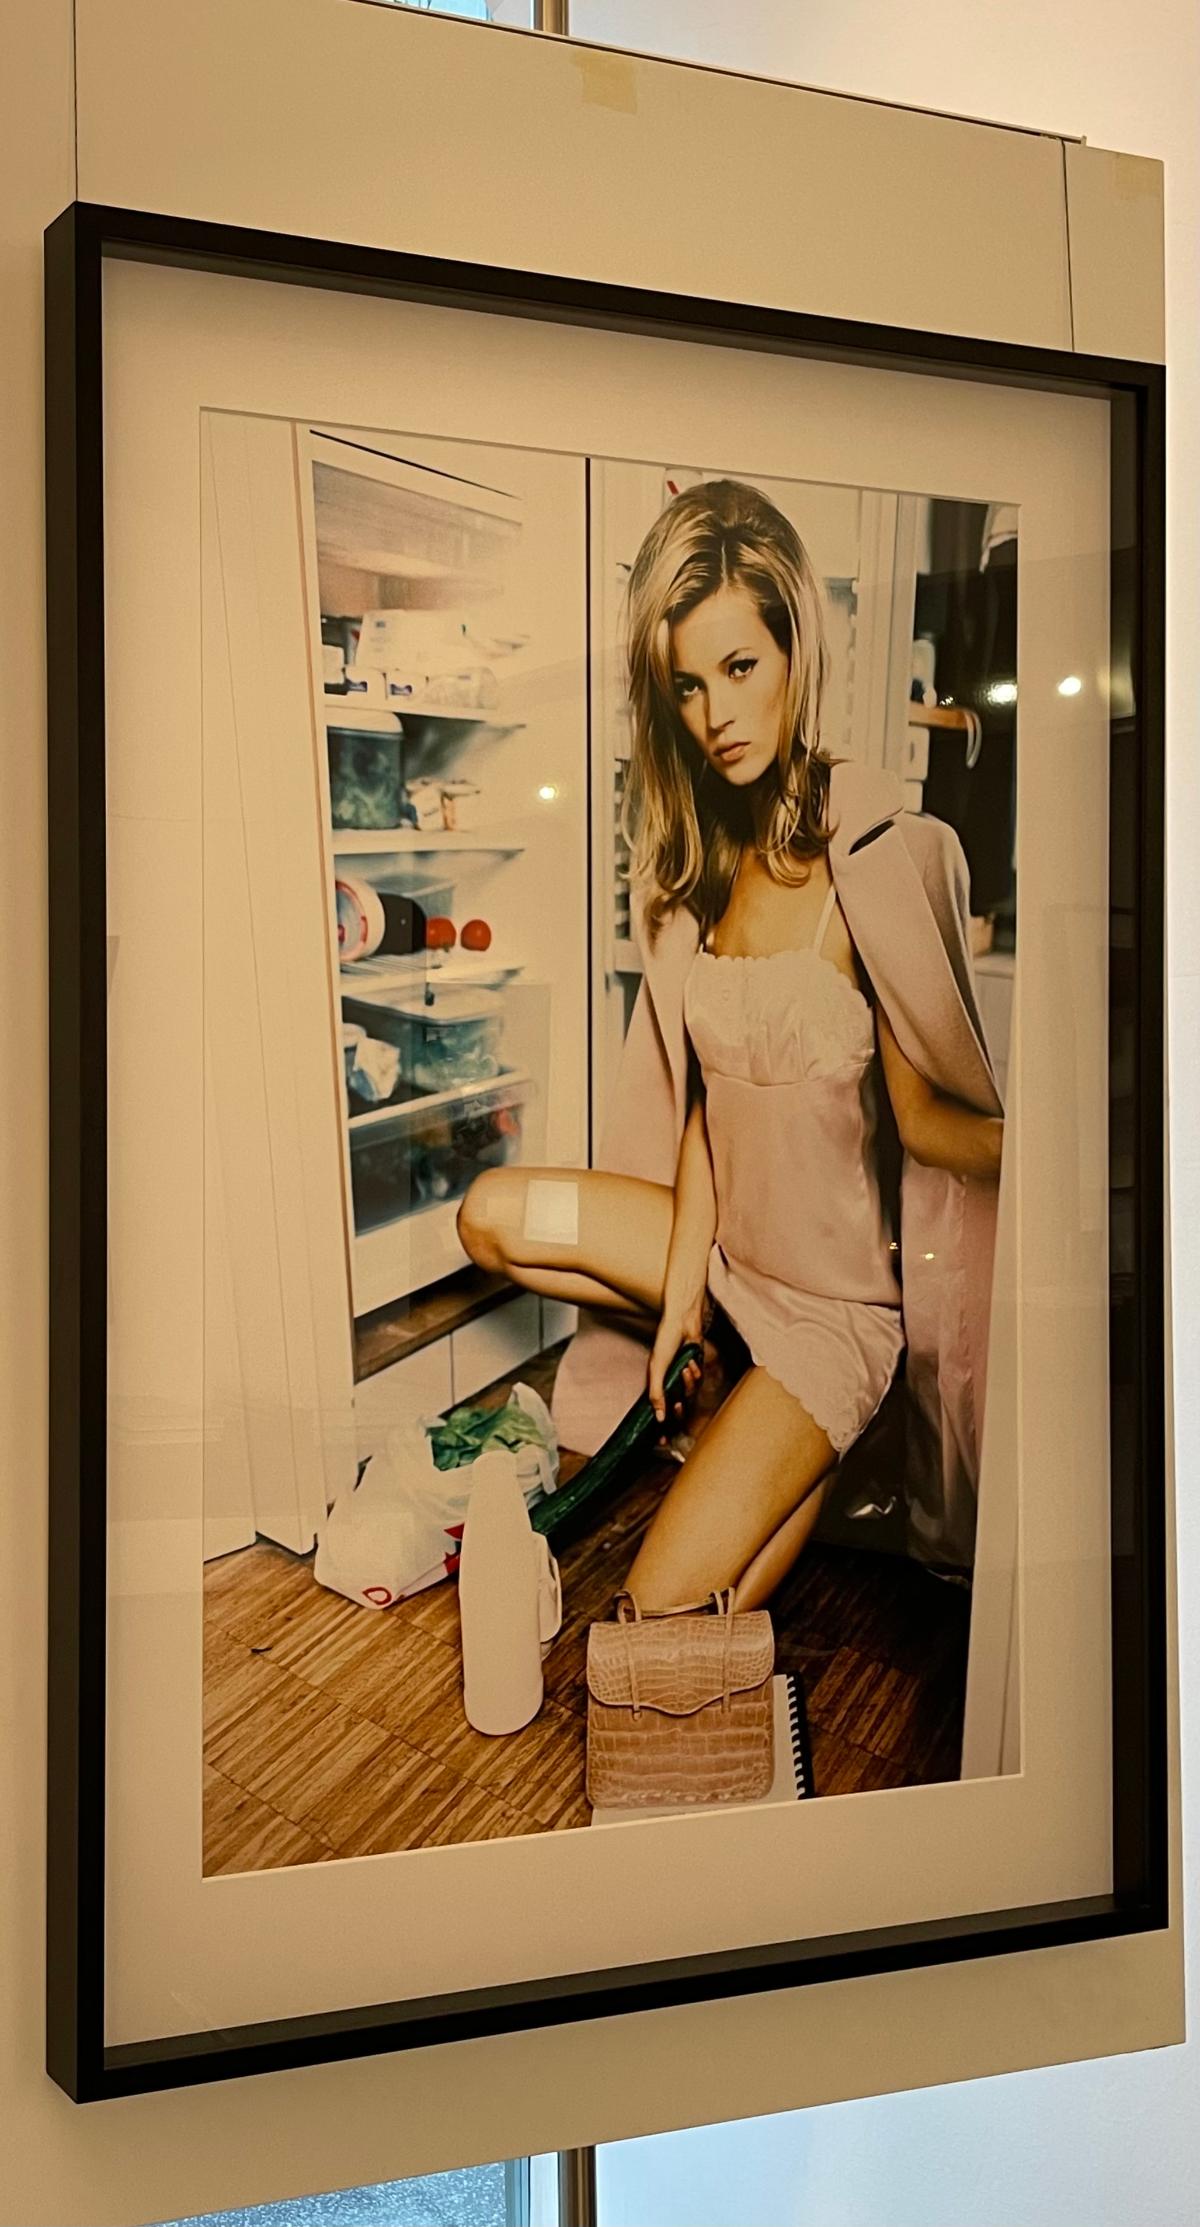 Kate Moss - the supermodel kneeling in front of a fridge holding a cucumber  - Photograph by Ellen von Unwerth